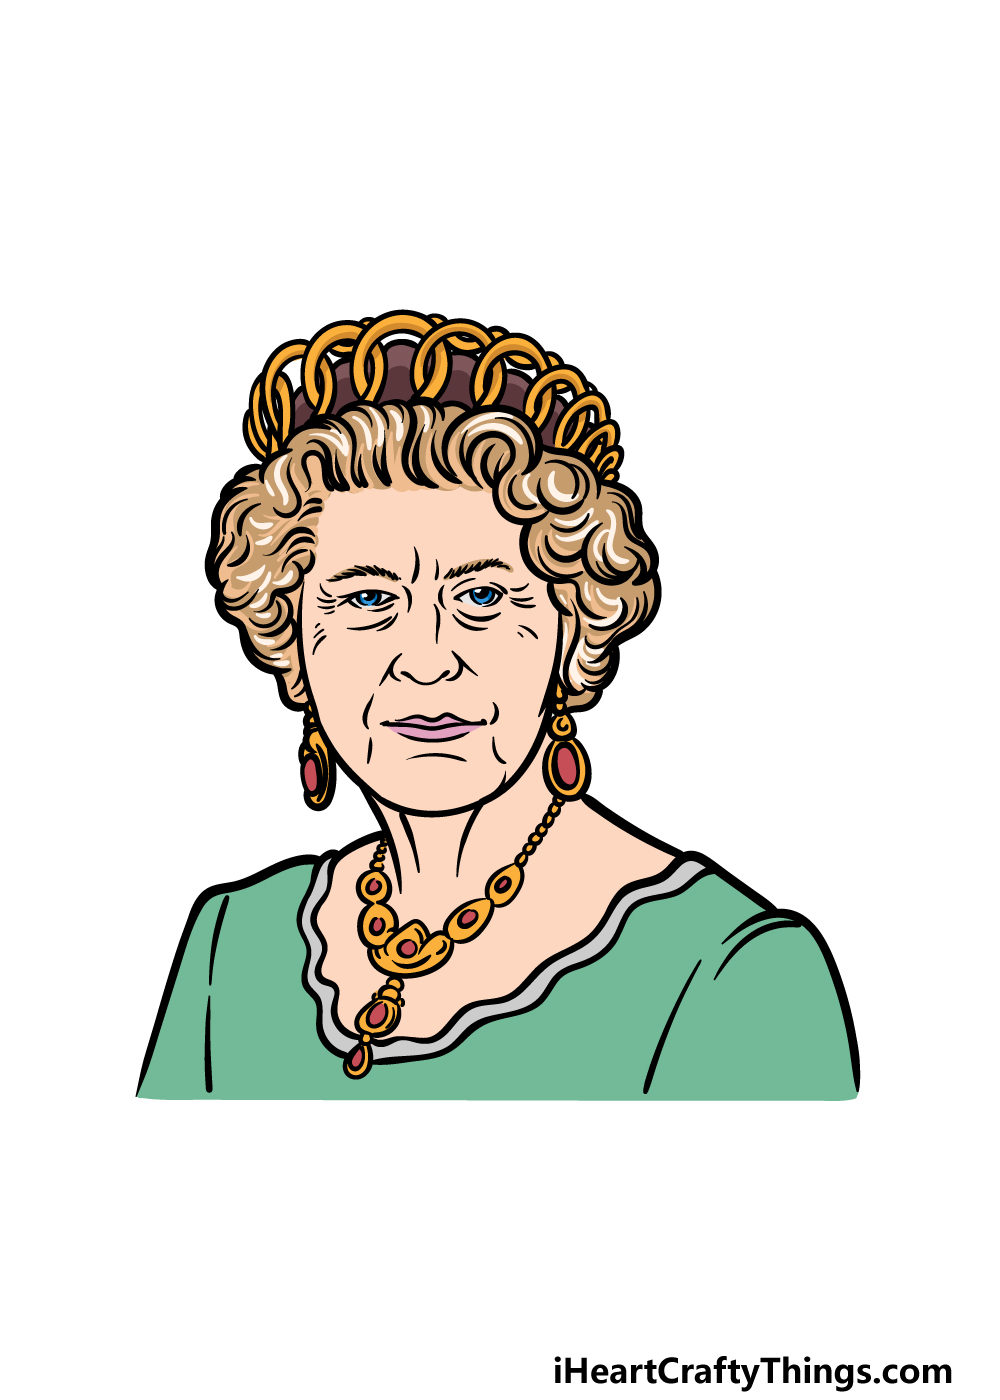 Queen Drawing - How To Draw The Queen Step By Step